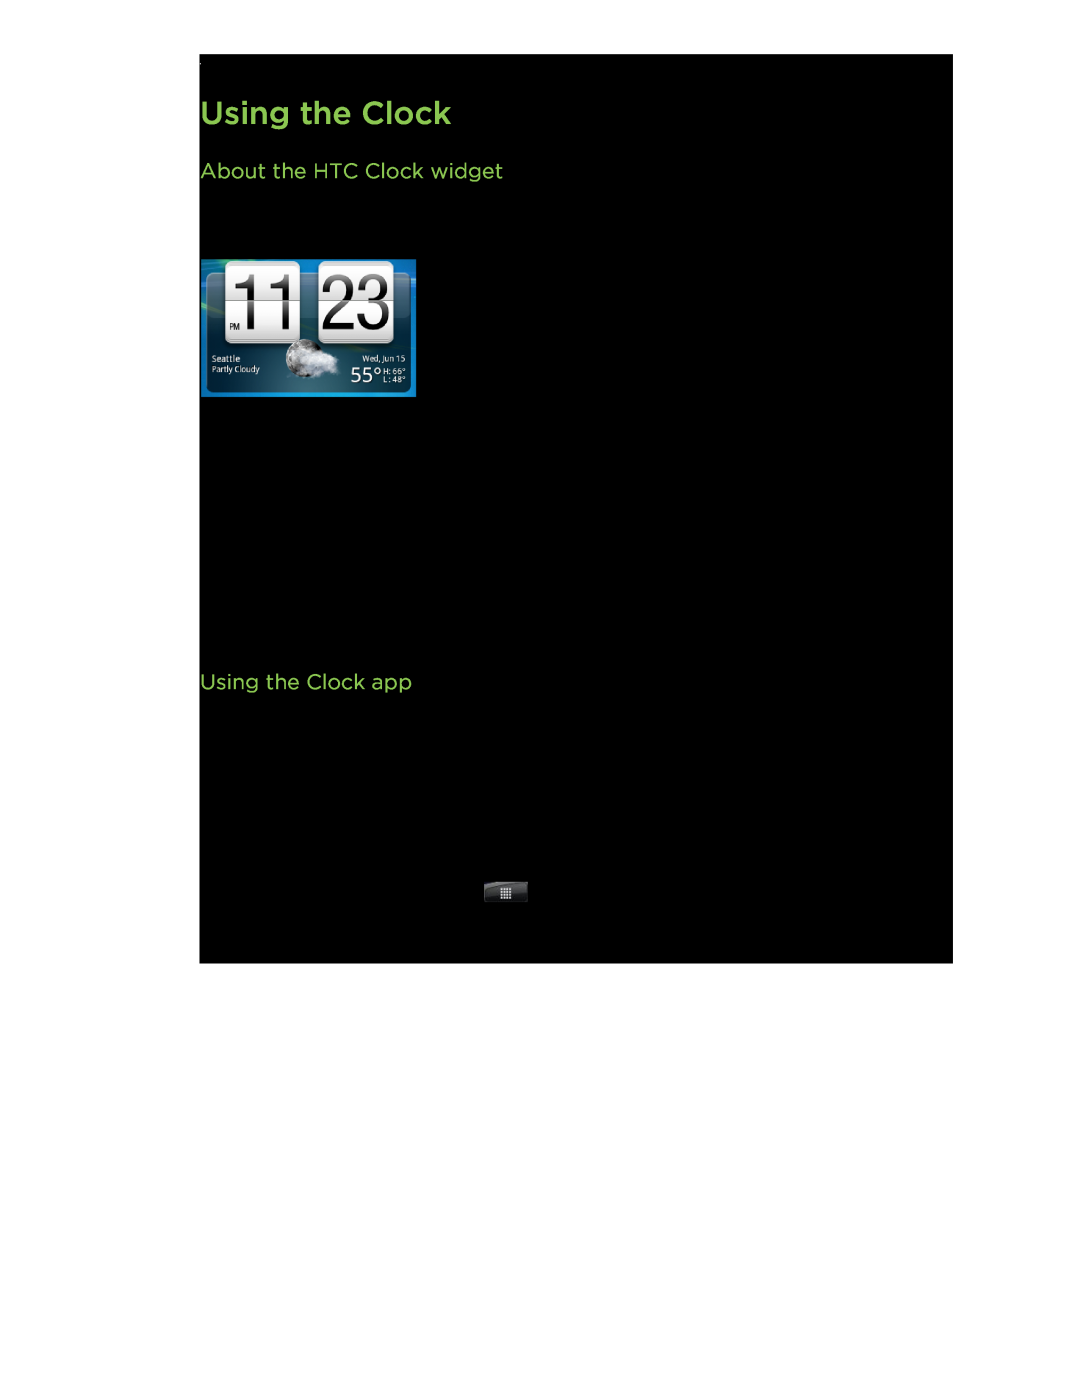 HTC S manual About the HTC Clock widget, Using the Clock app 